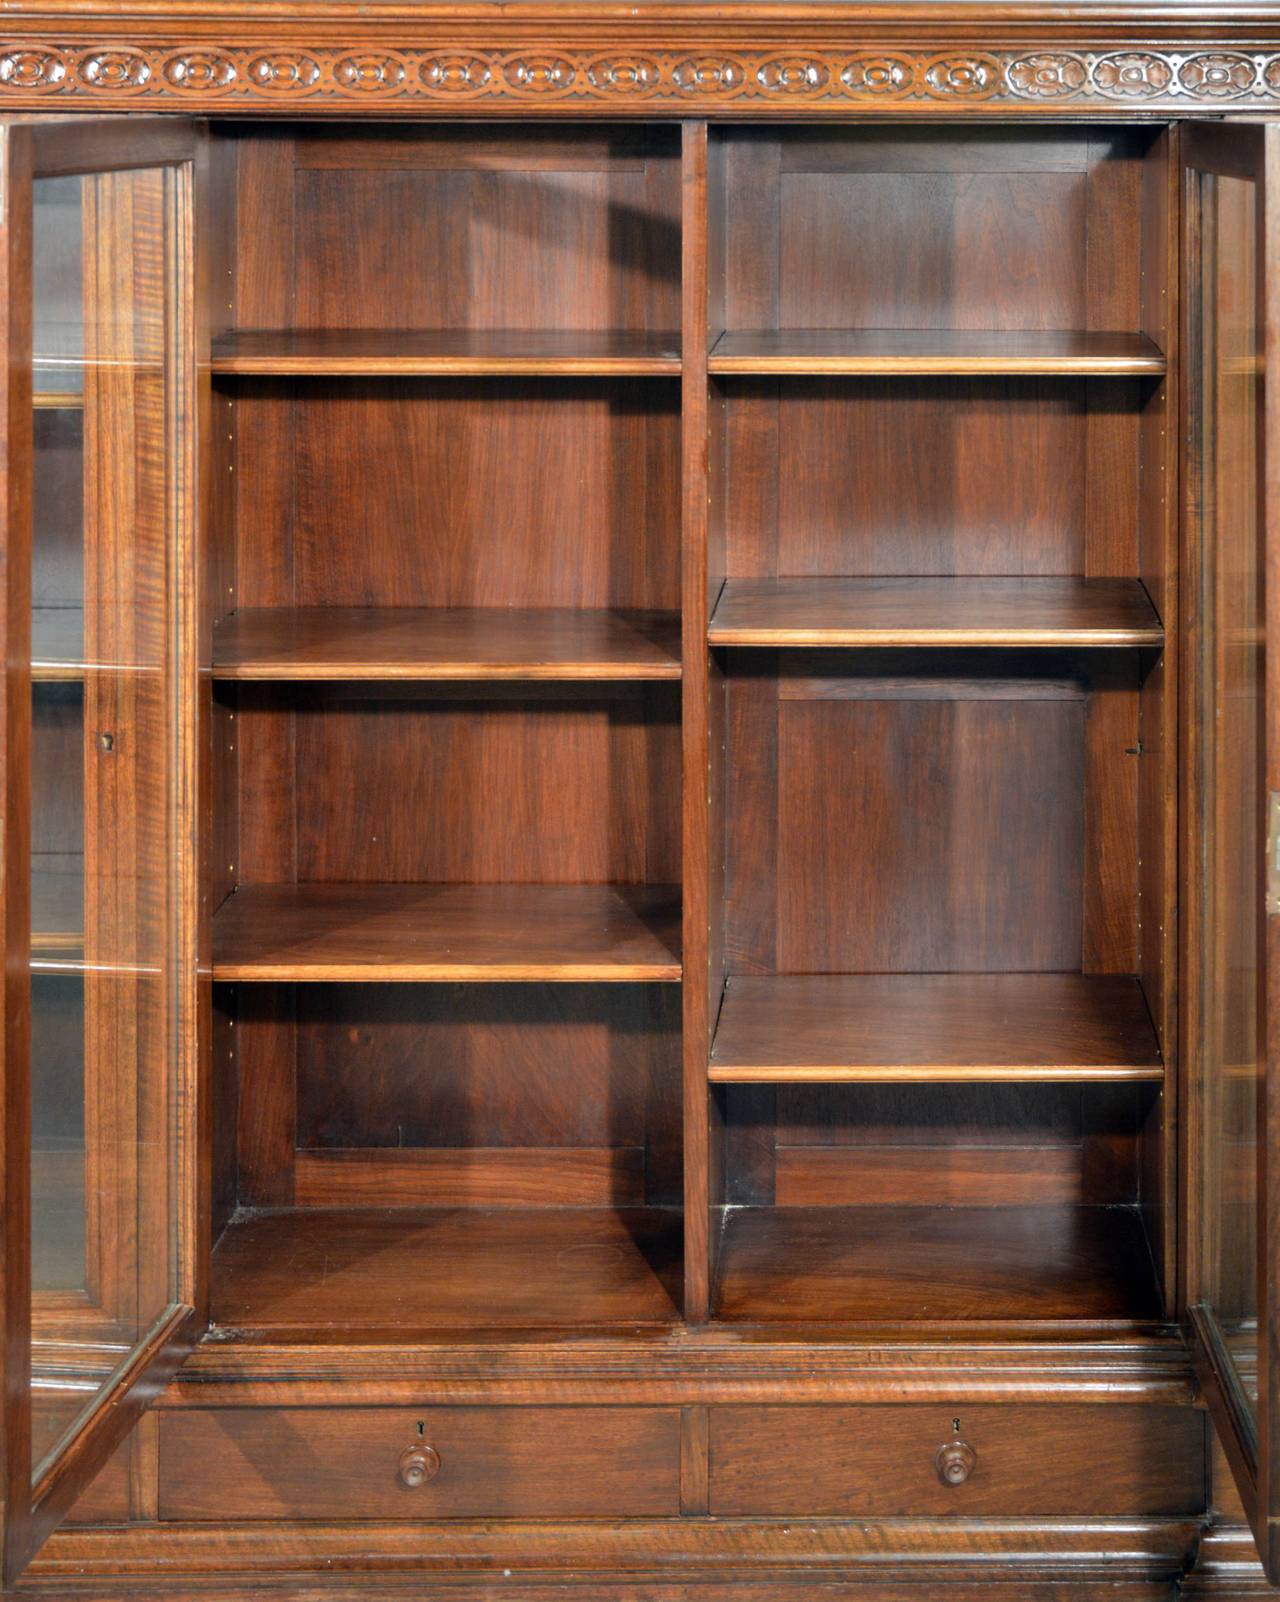 Gorgeous and substantial walnut American Renaissance Revival display case and cigar humidor, circa 1897. Drawers on bottom and hidden side cabinets. Left hidden case has galvanized zinc cabinet. Measures: 62